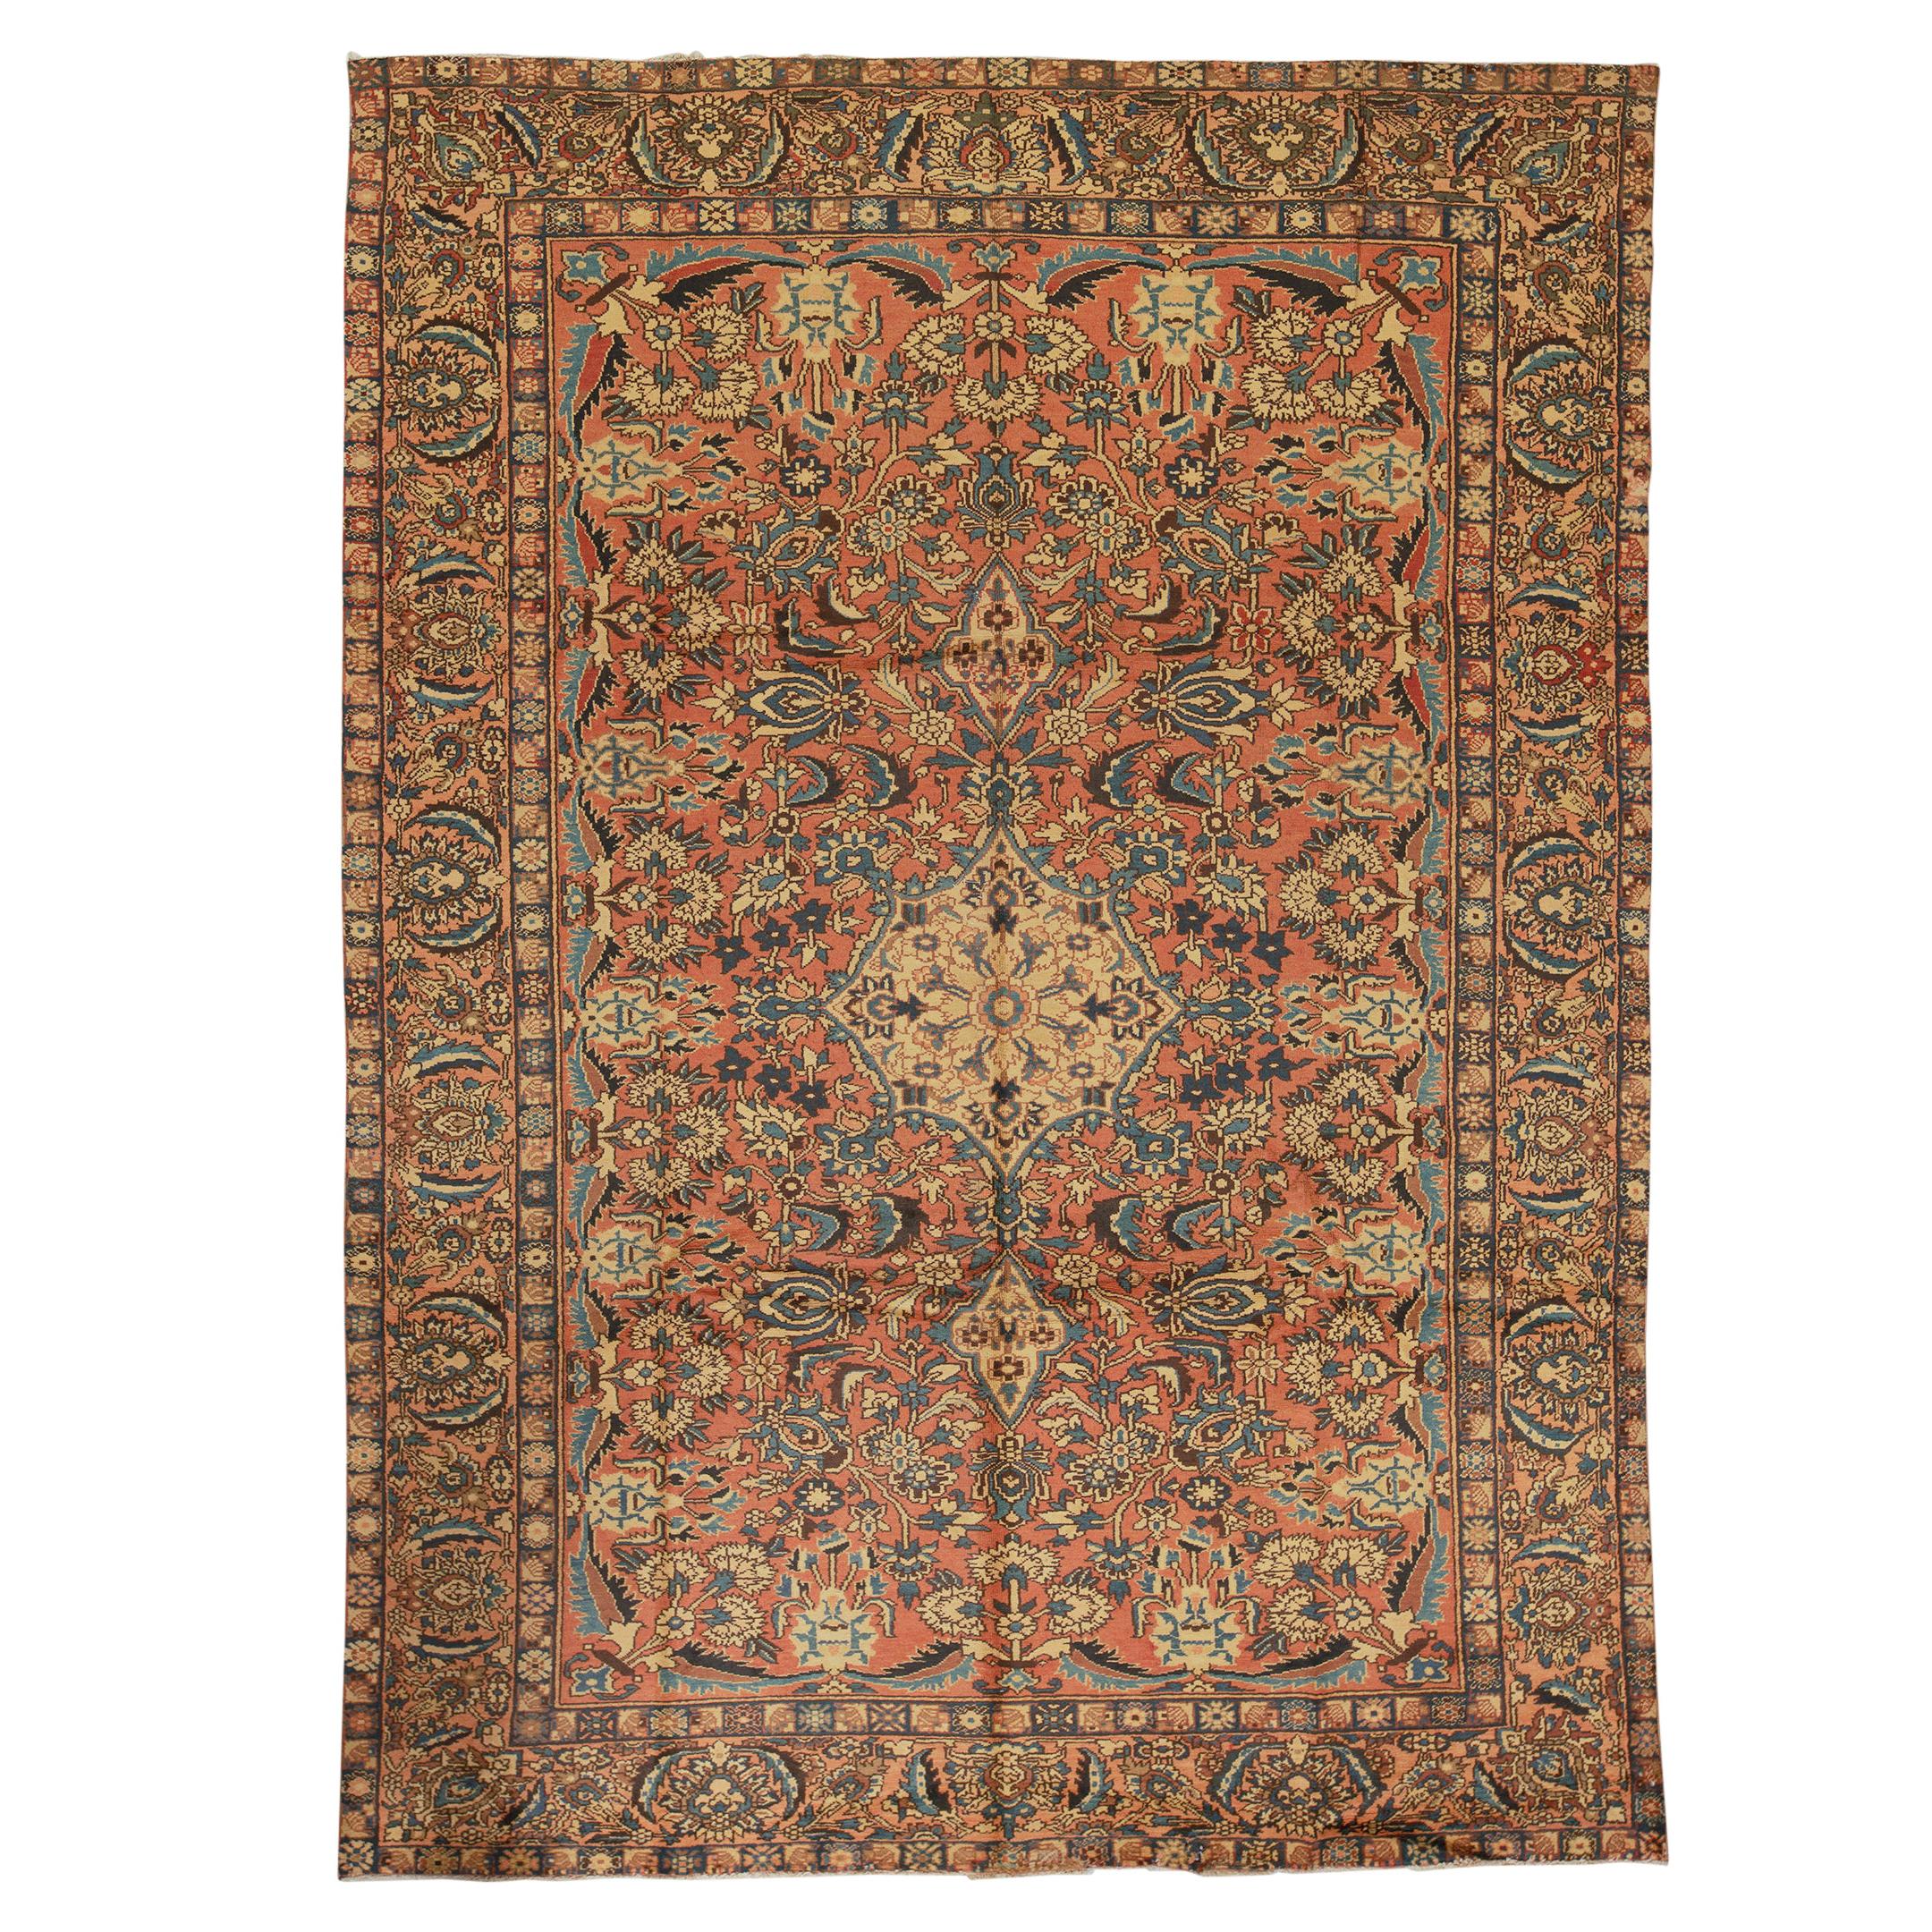   Antique Persian Fine Traditional Handwoven Luxury Wool Rust / Peach Rug For Sale